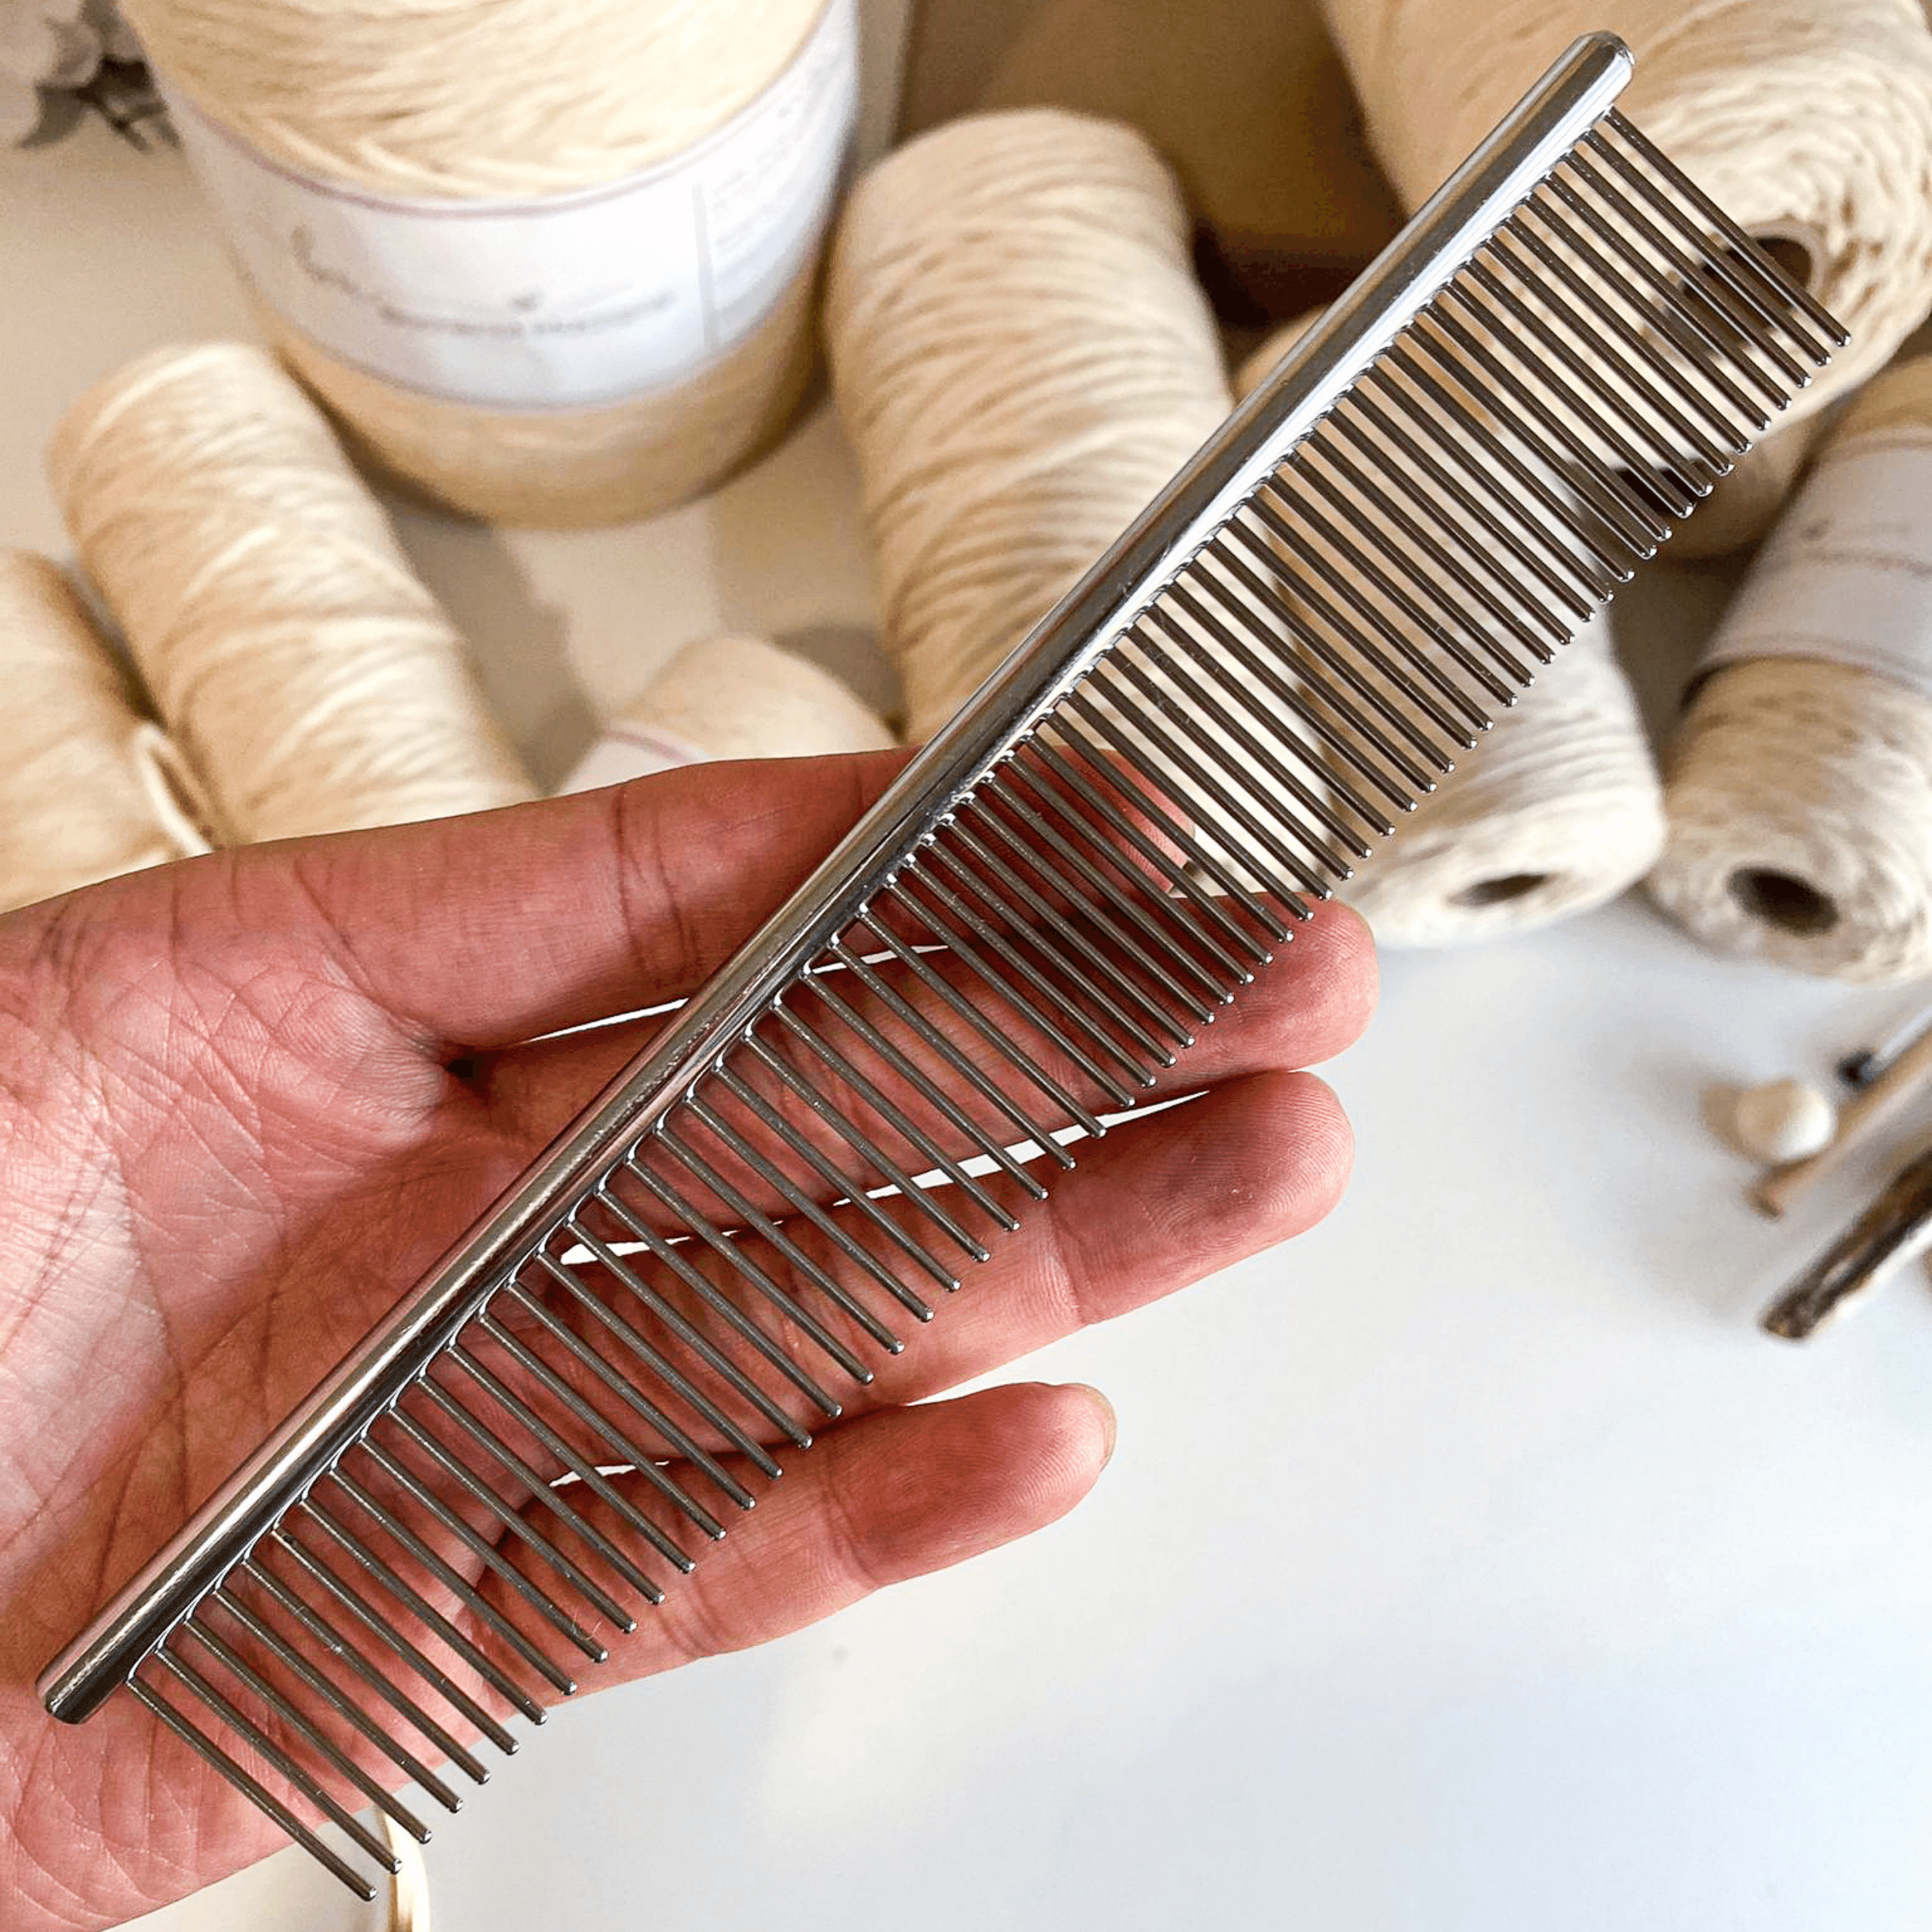 1PC Tapestry Weaving Comb Macrame Brush Multifunctional Weaving Comb Open  Knot Comb Weaving Knitting Accessories